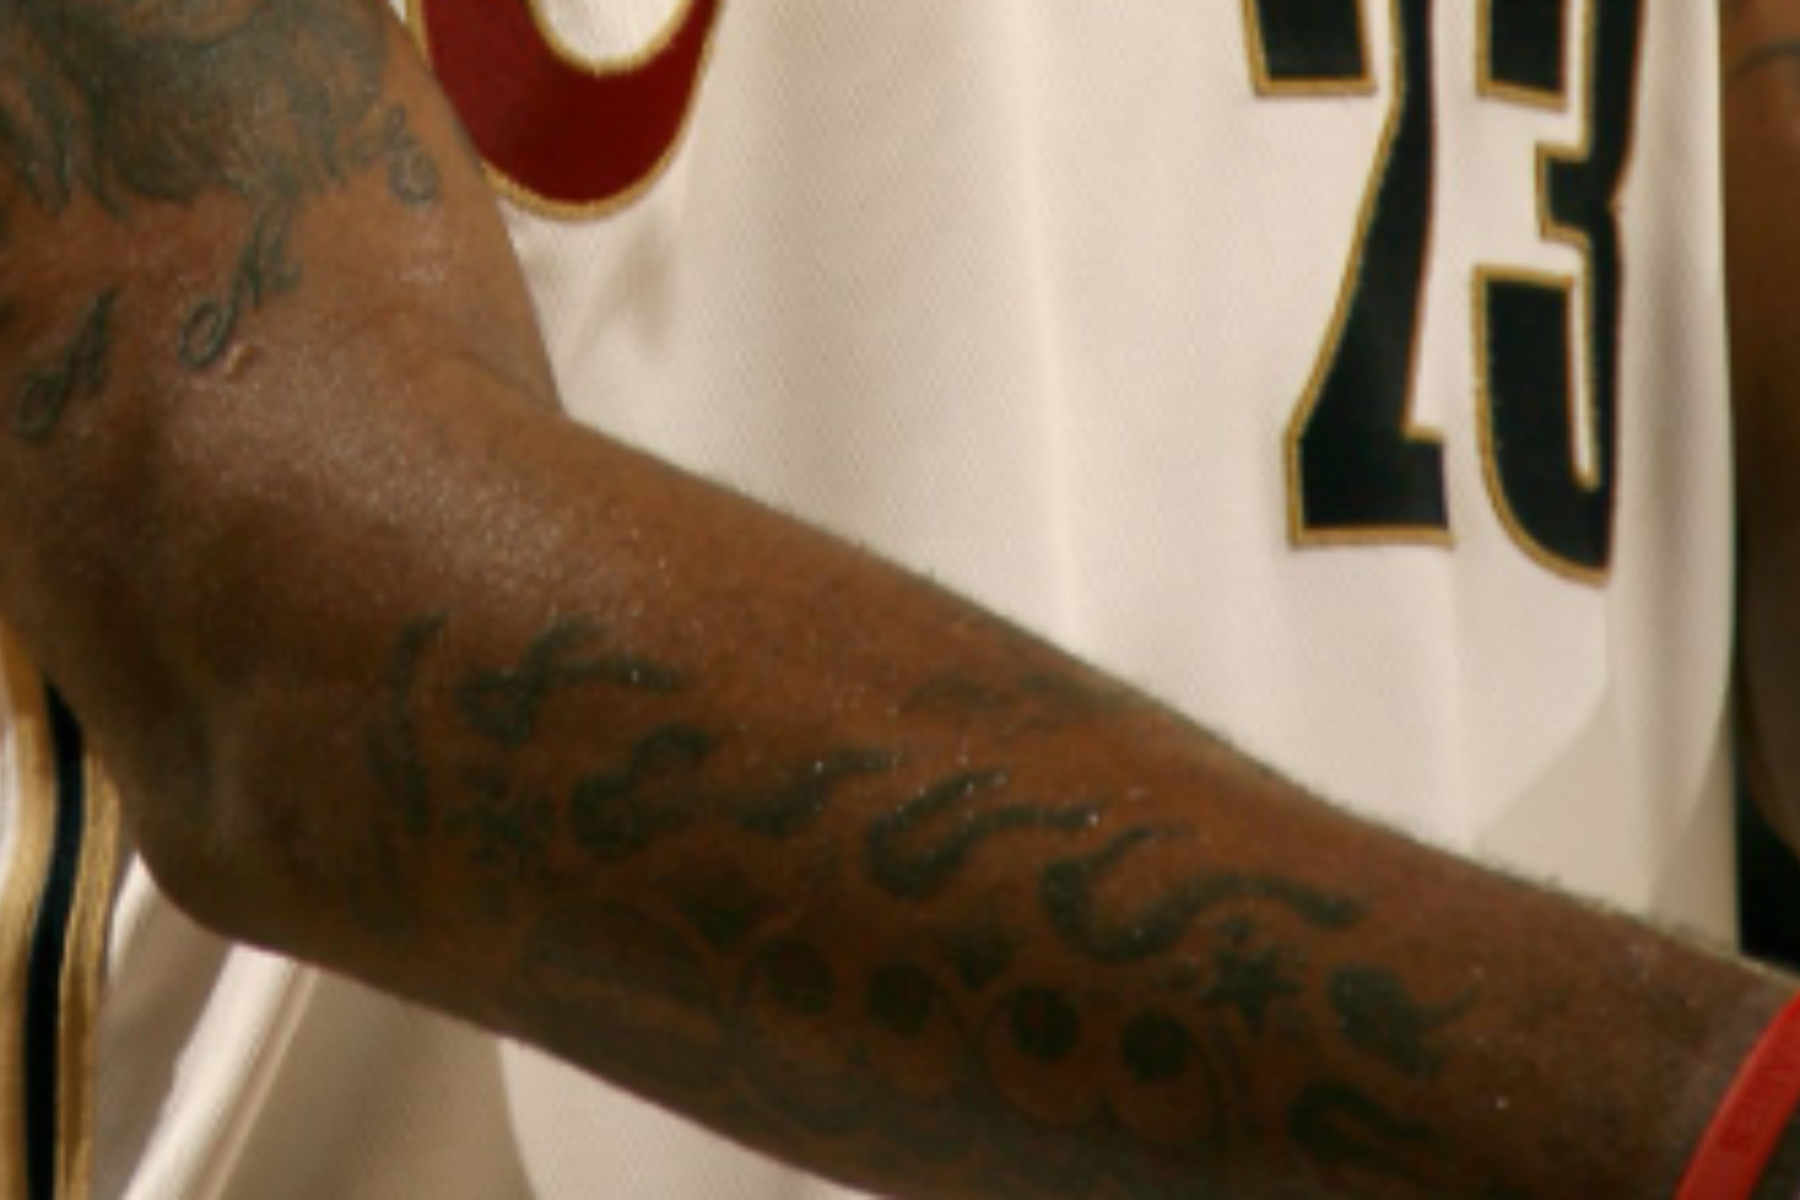 LeBron James has flames tattoo on his arm